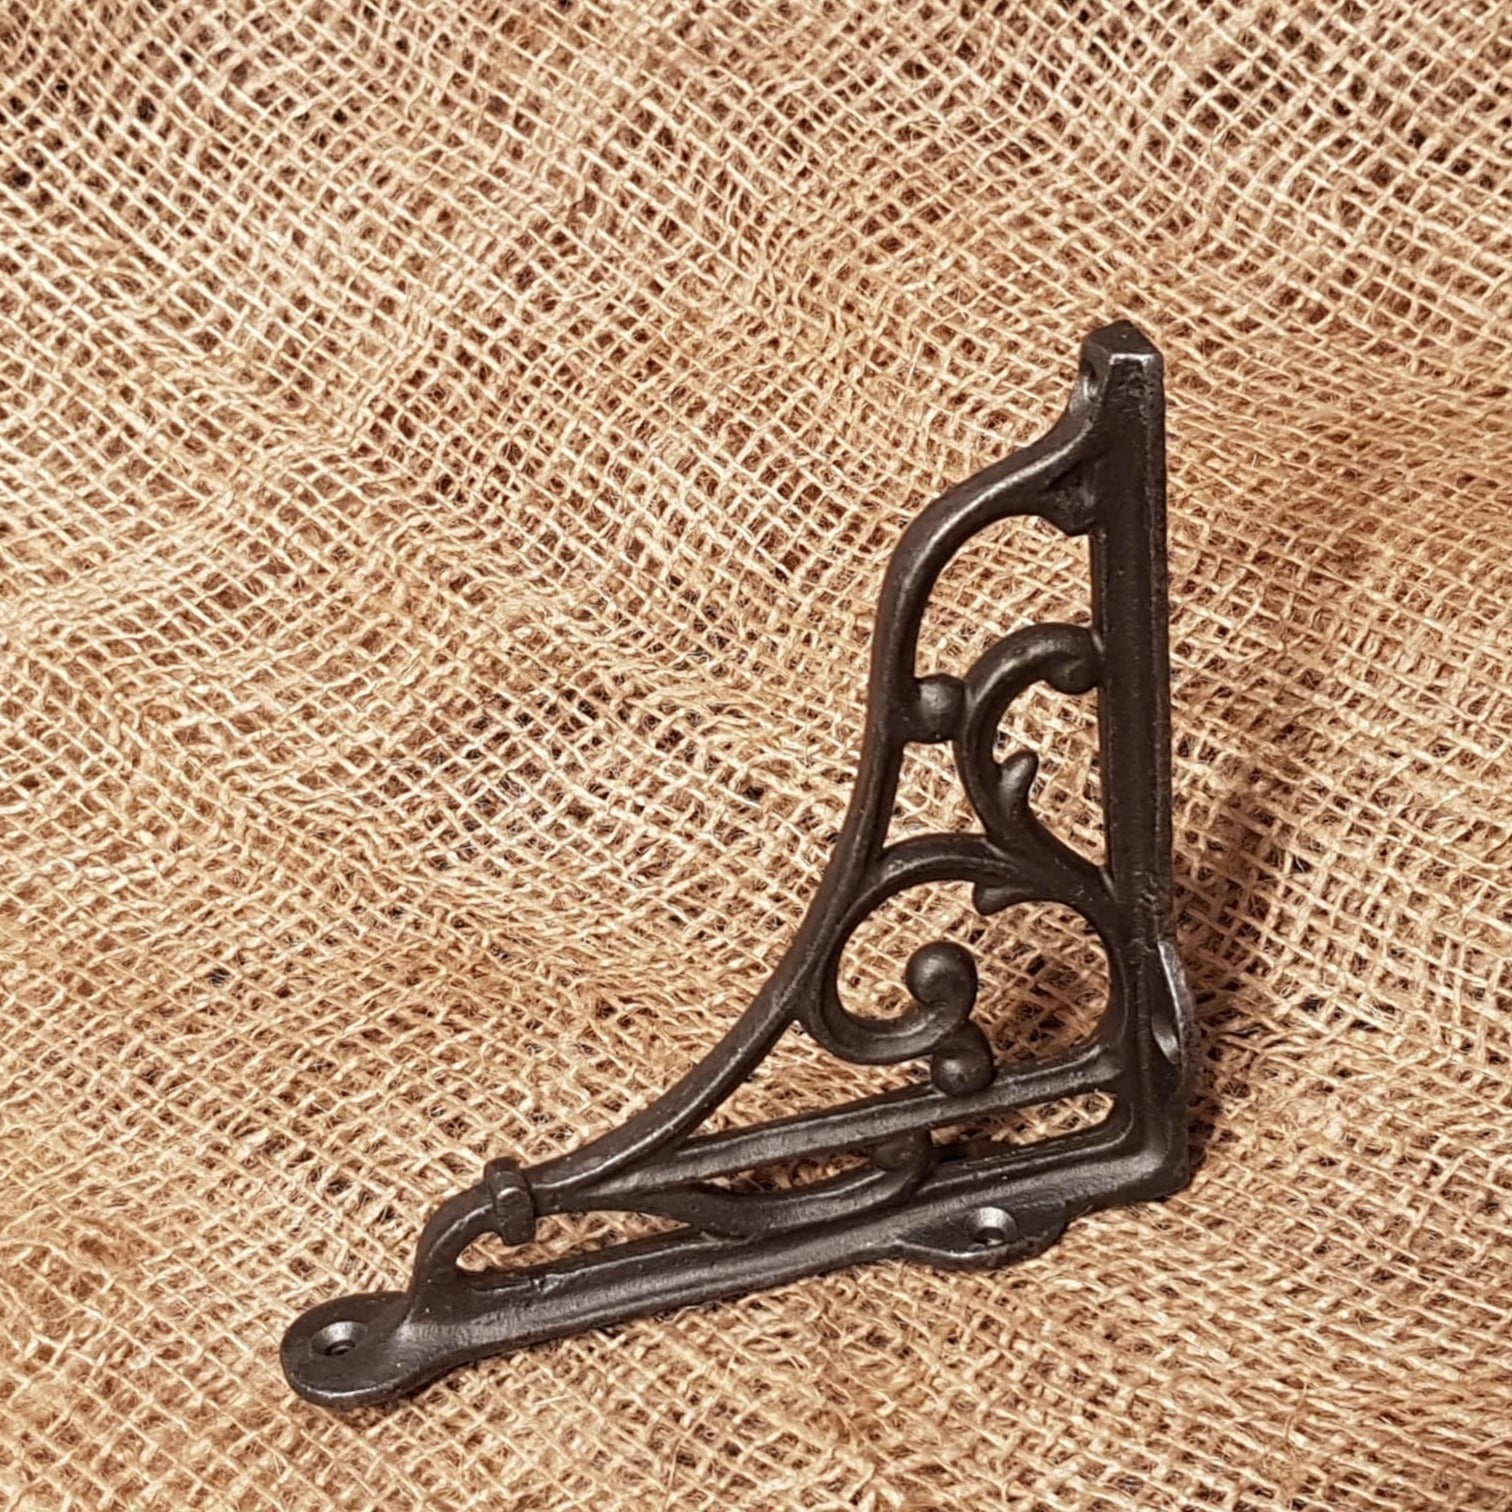 Heritage Bracket 3" x 3" - Spearhead Collection - Shelf Support Brackets - Brackets, Country Farmhouse, Home Decor, Support Brackets